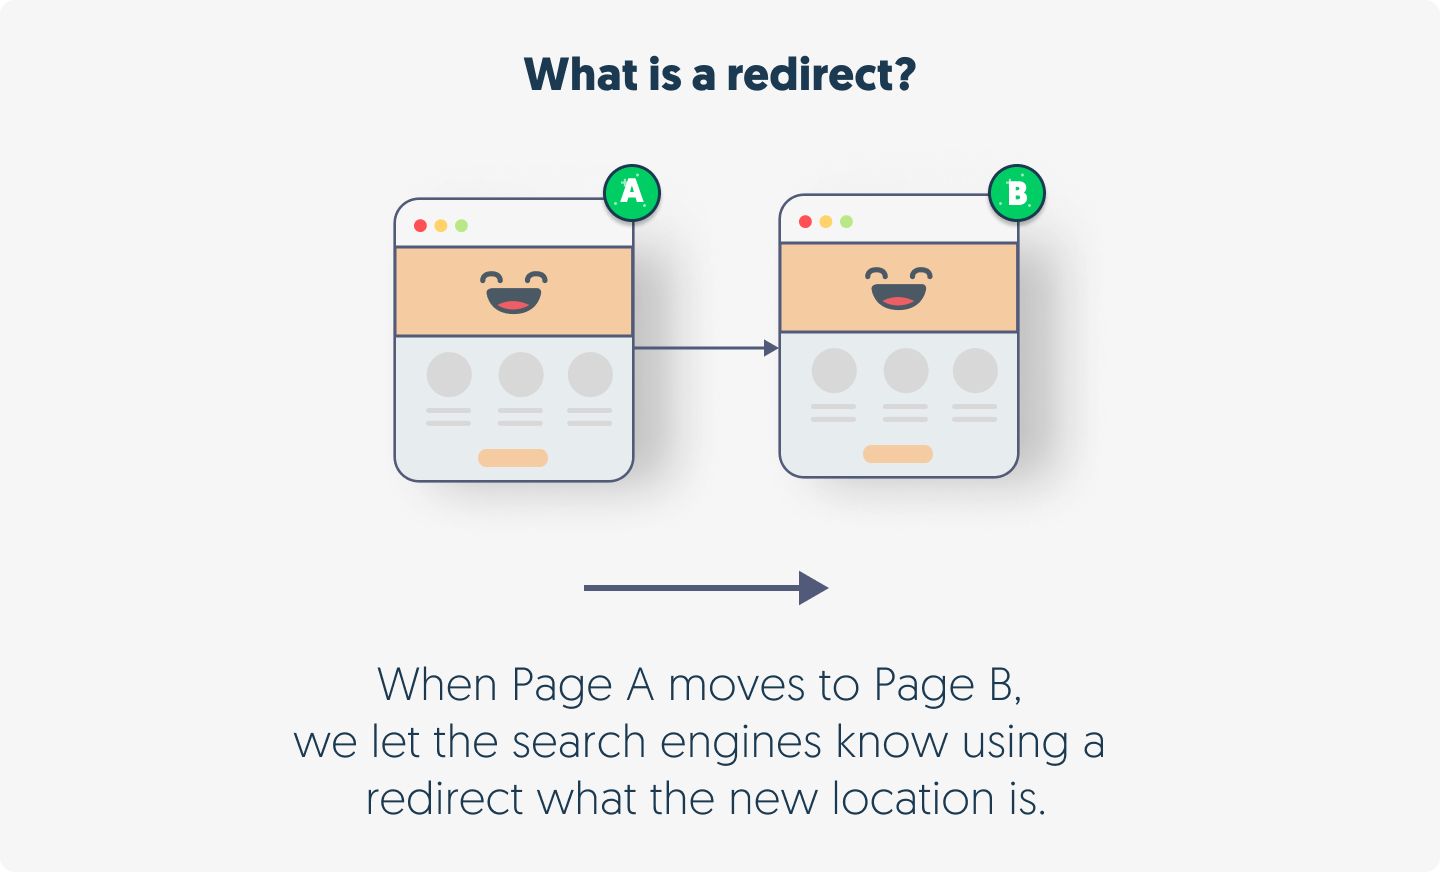 What is a redirect? A redirect, in the context of web development and search engine optimization, is a technique used to automatically send users and search engine crawlers from one URL to another.